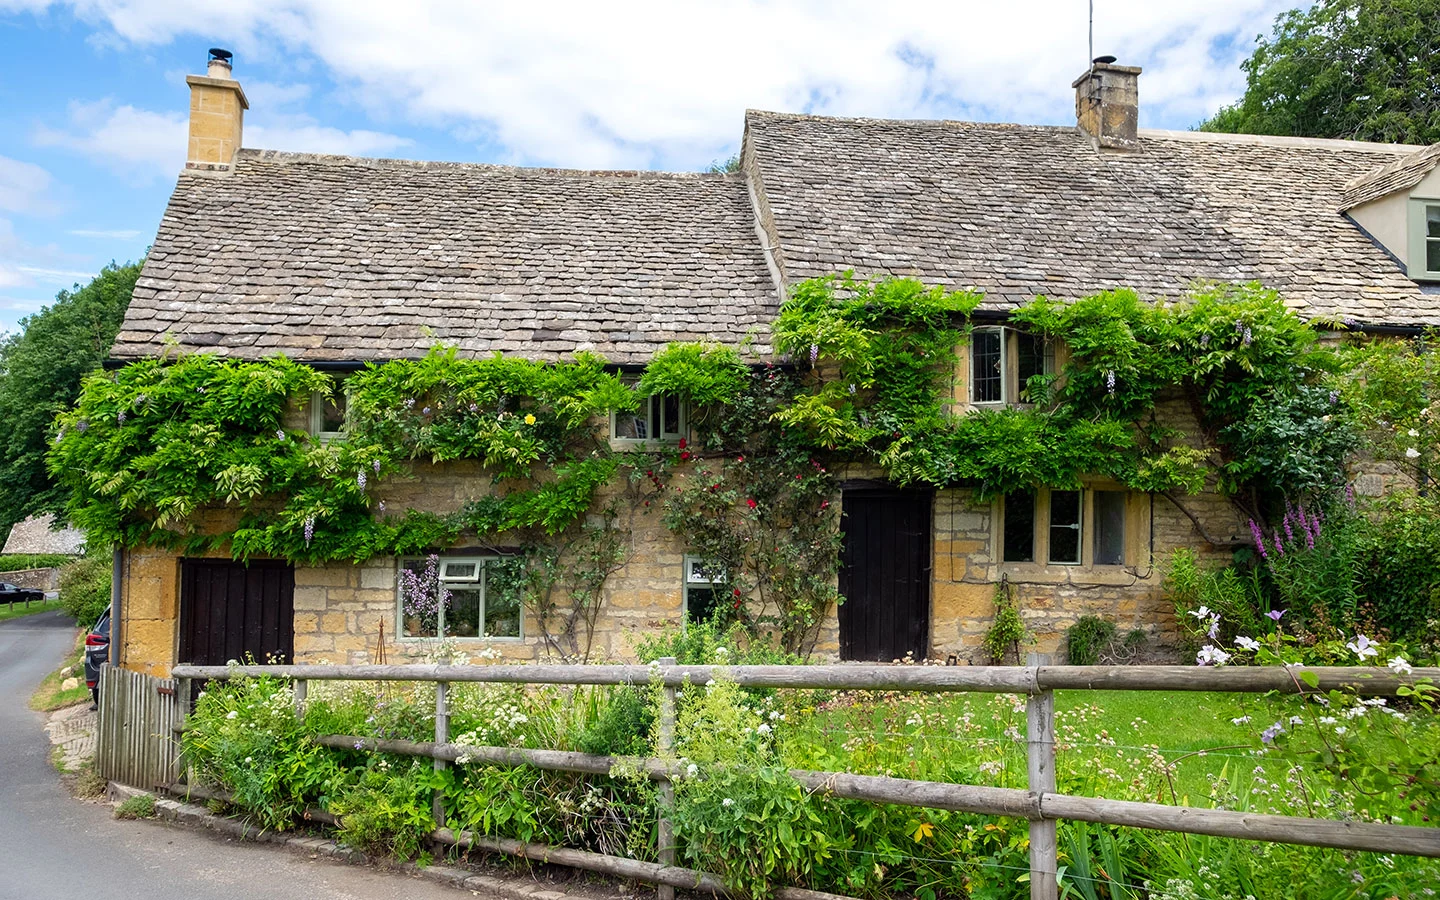 Things to do in Snowshill, Cotswolds: A local’s guide